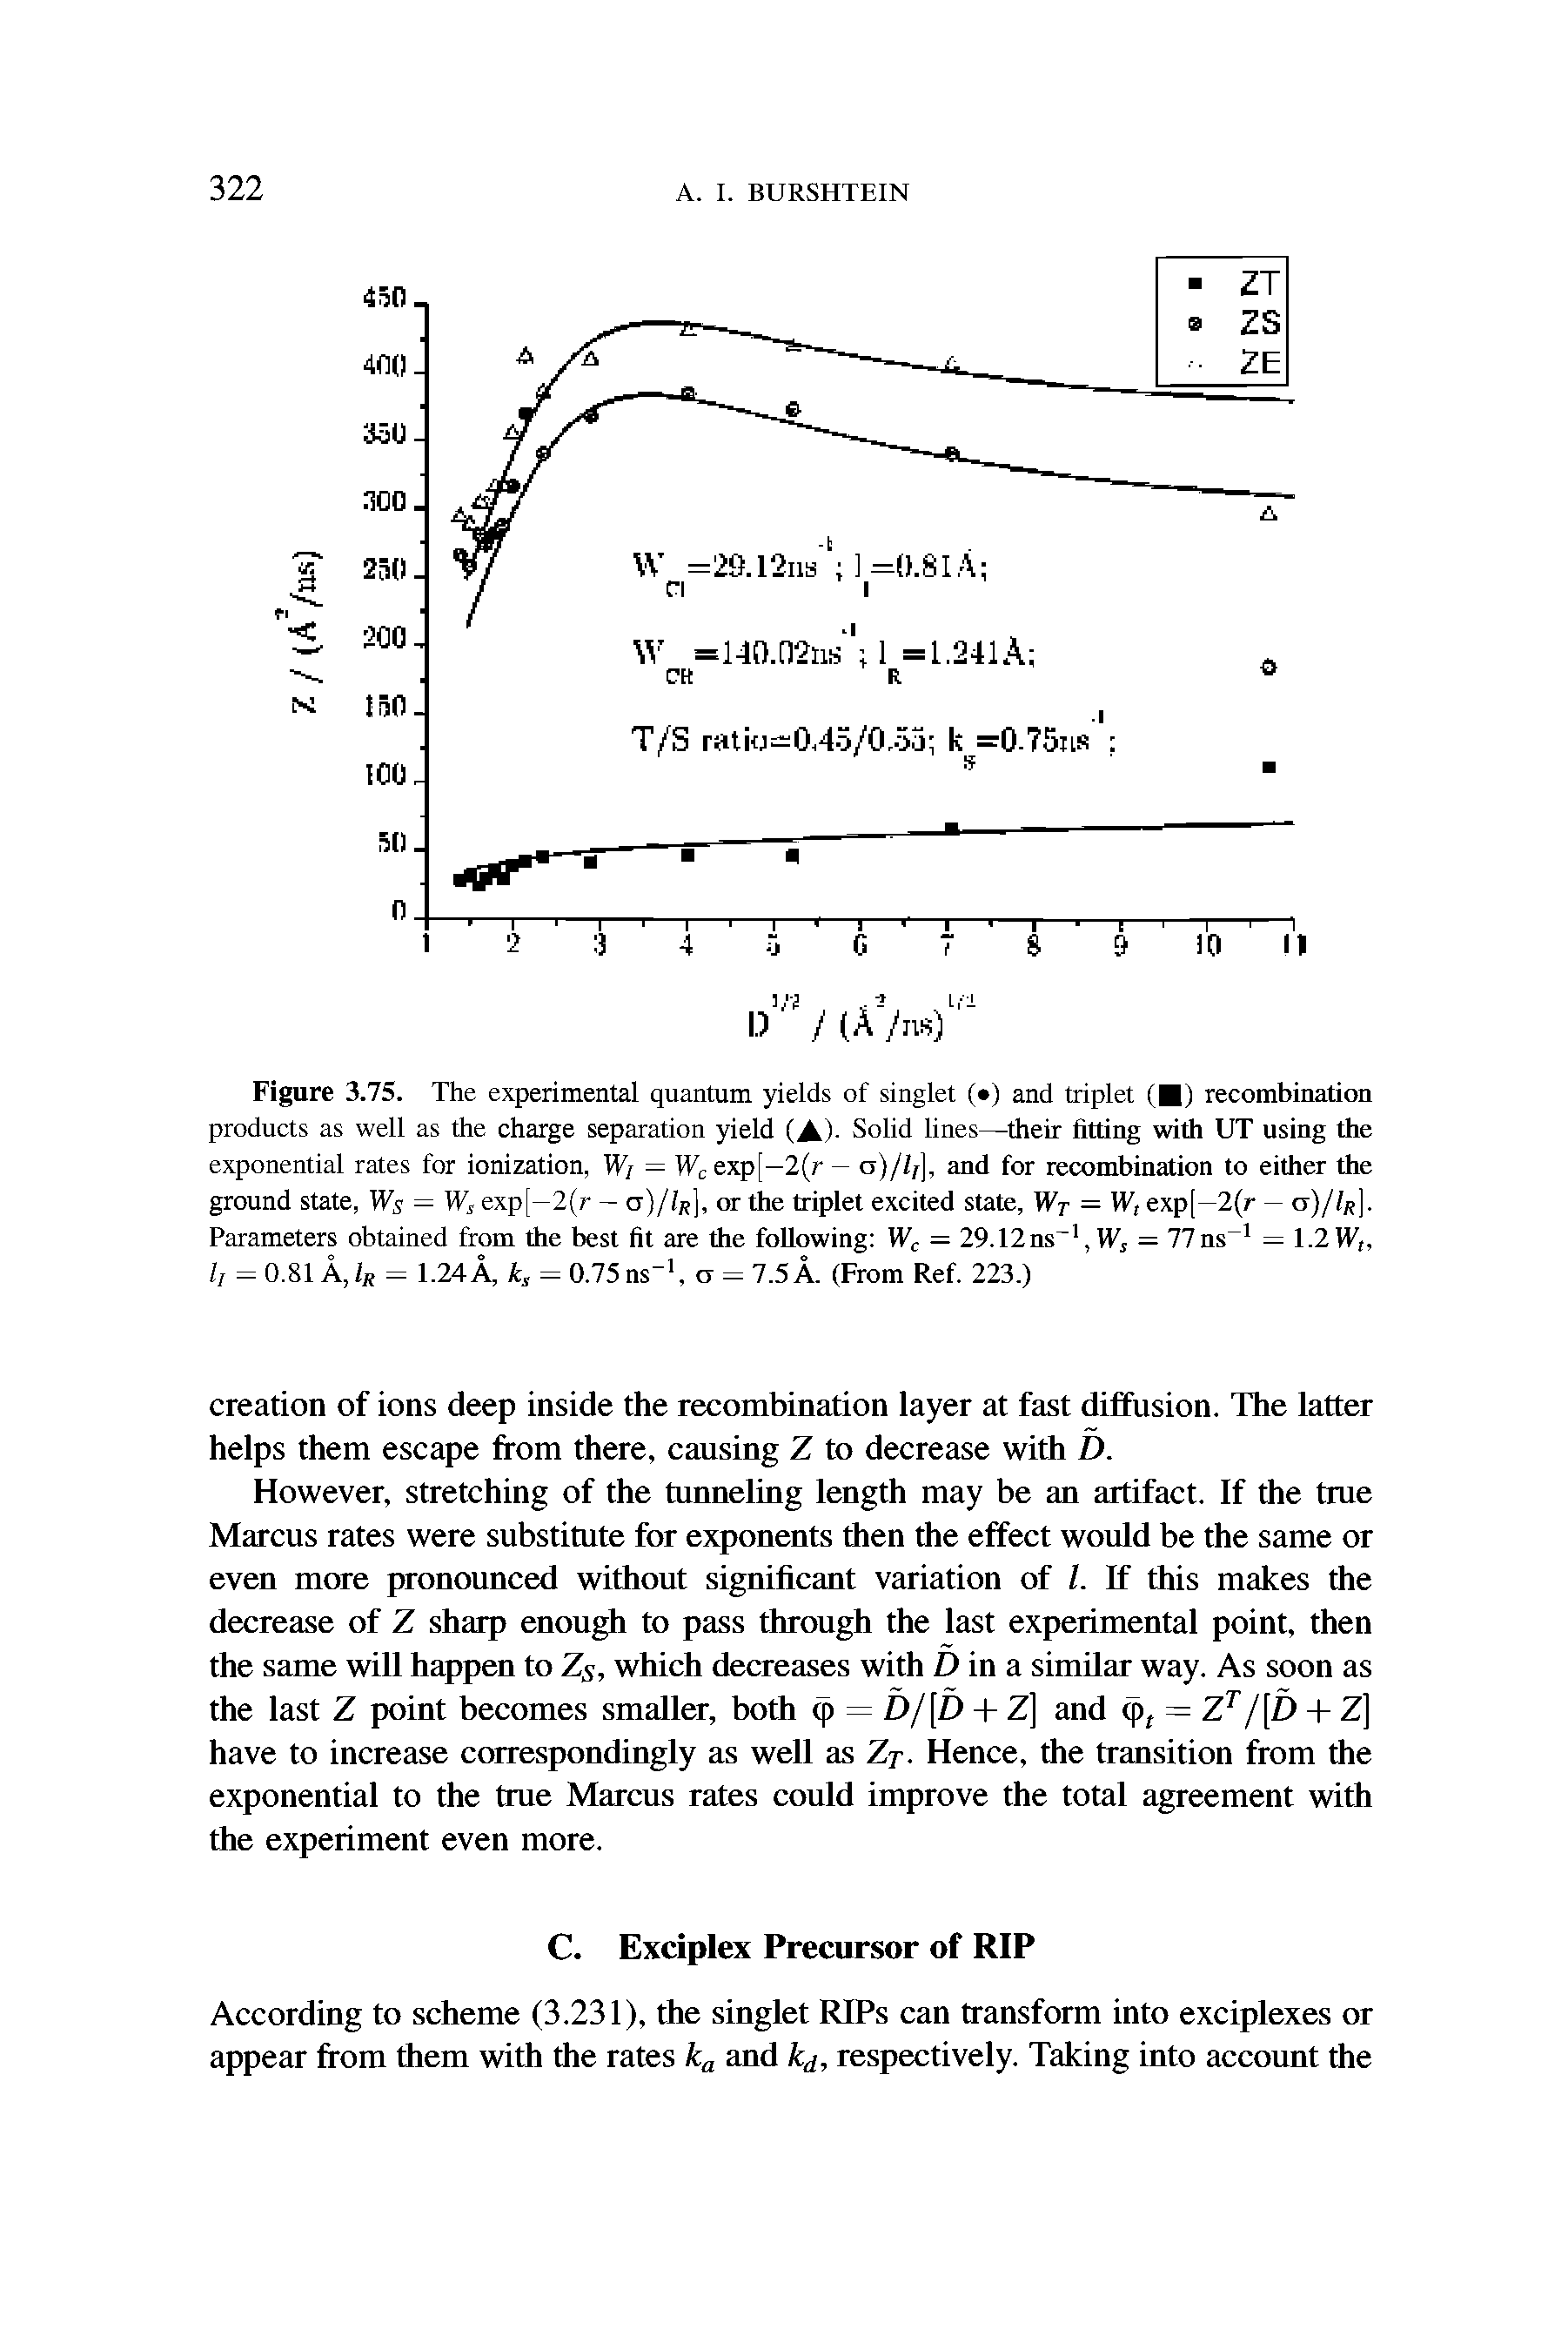 Figure 3.75. The experimental quantum yields of singlet ( ) and triplet ( ) recombination products as well as the charge separation yield (A)- Solid lines—their fitting with UT using the exponential rates for ionization, Wi = fVcexp[—2(r — a)// ], and for recombination to either the ground state, Ws = W, exp[—2(r — a) fin], or the triplet excited state, Wr = W, exp[—2(r — cj)//r]. Parameters obtained from the best fit are the following Wc = 29.12ns 1, Ws = 77ns 1 — 1.21V, l] = 0.81 A, lR = 1.24A, k = 0.75 ns 1, a = 7.5 A. (From Ref. 223.)...